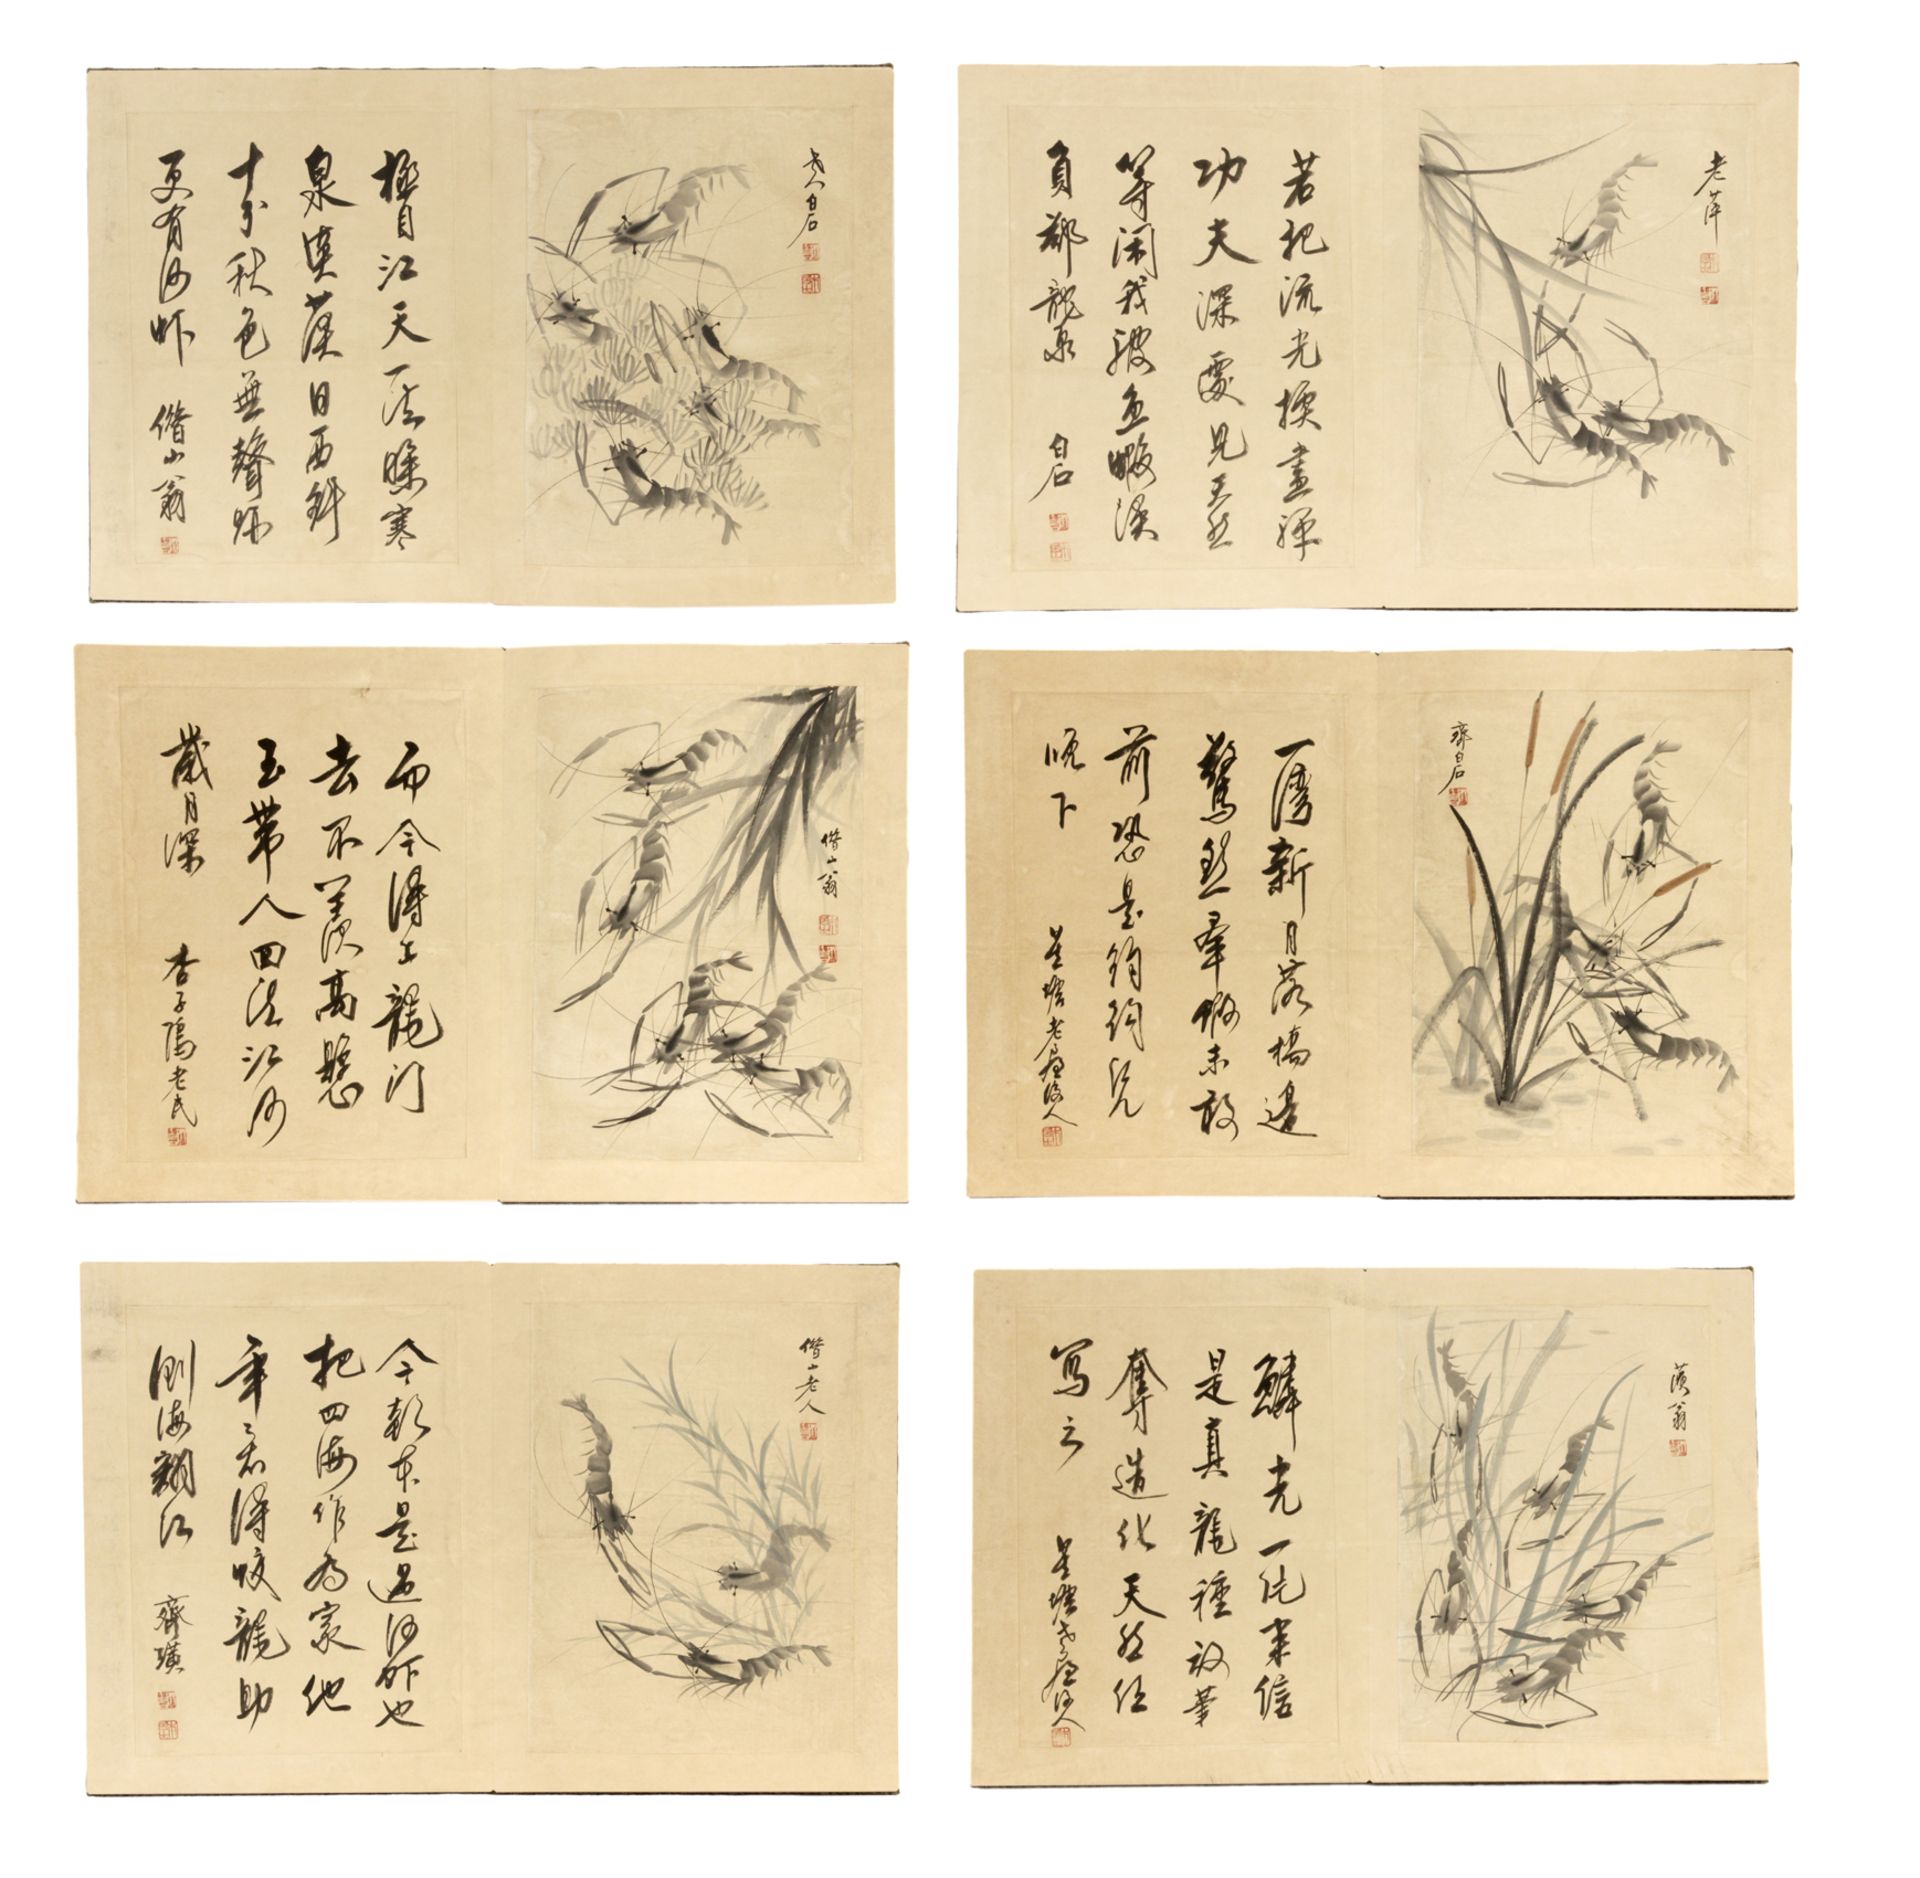 A 20th century Chinese sketches and poems album